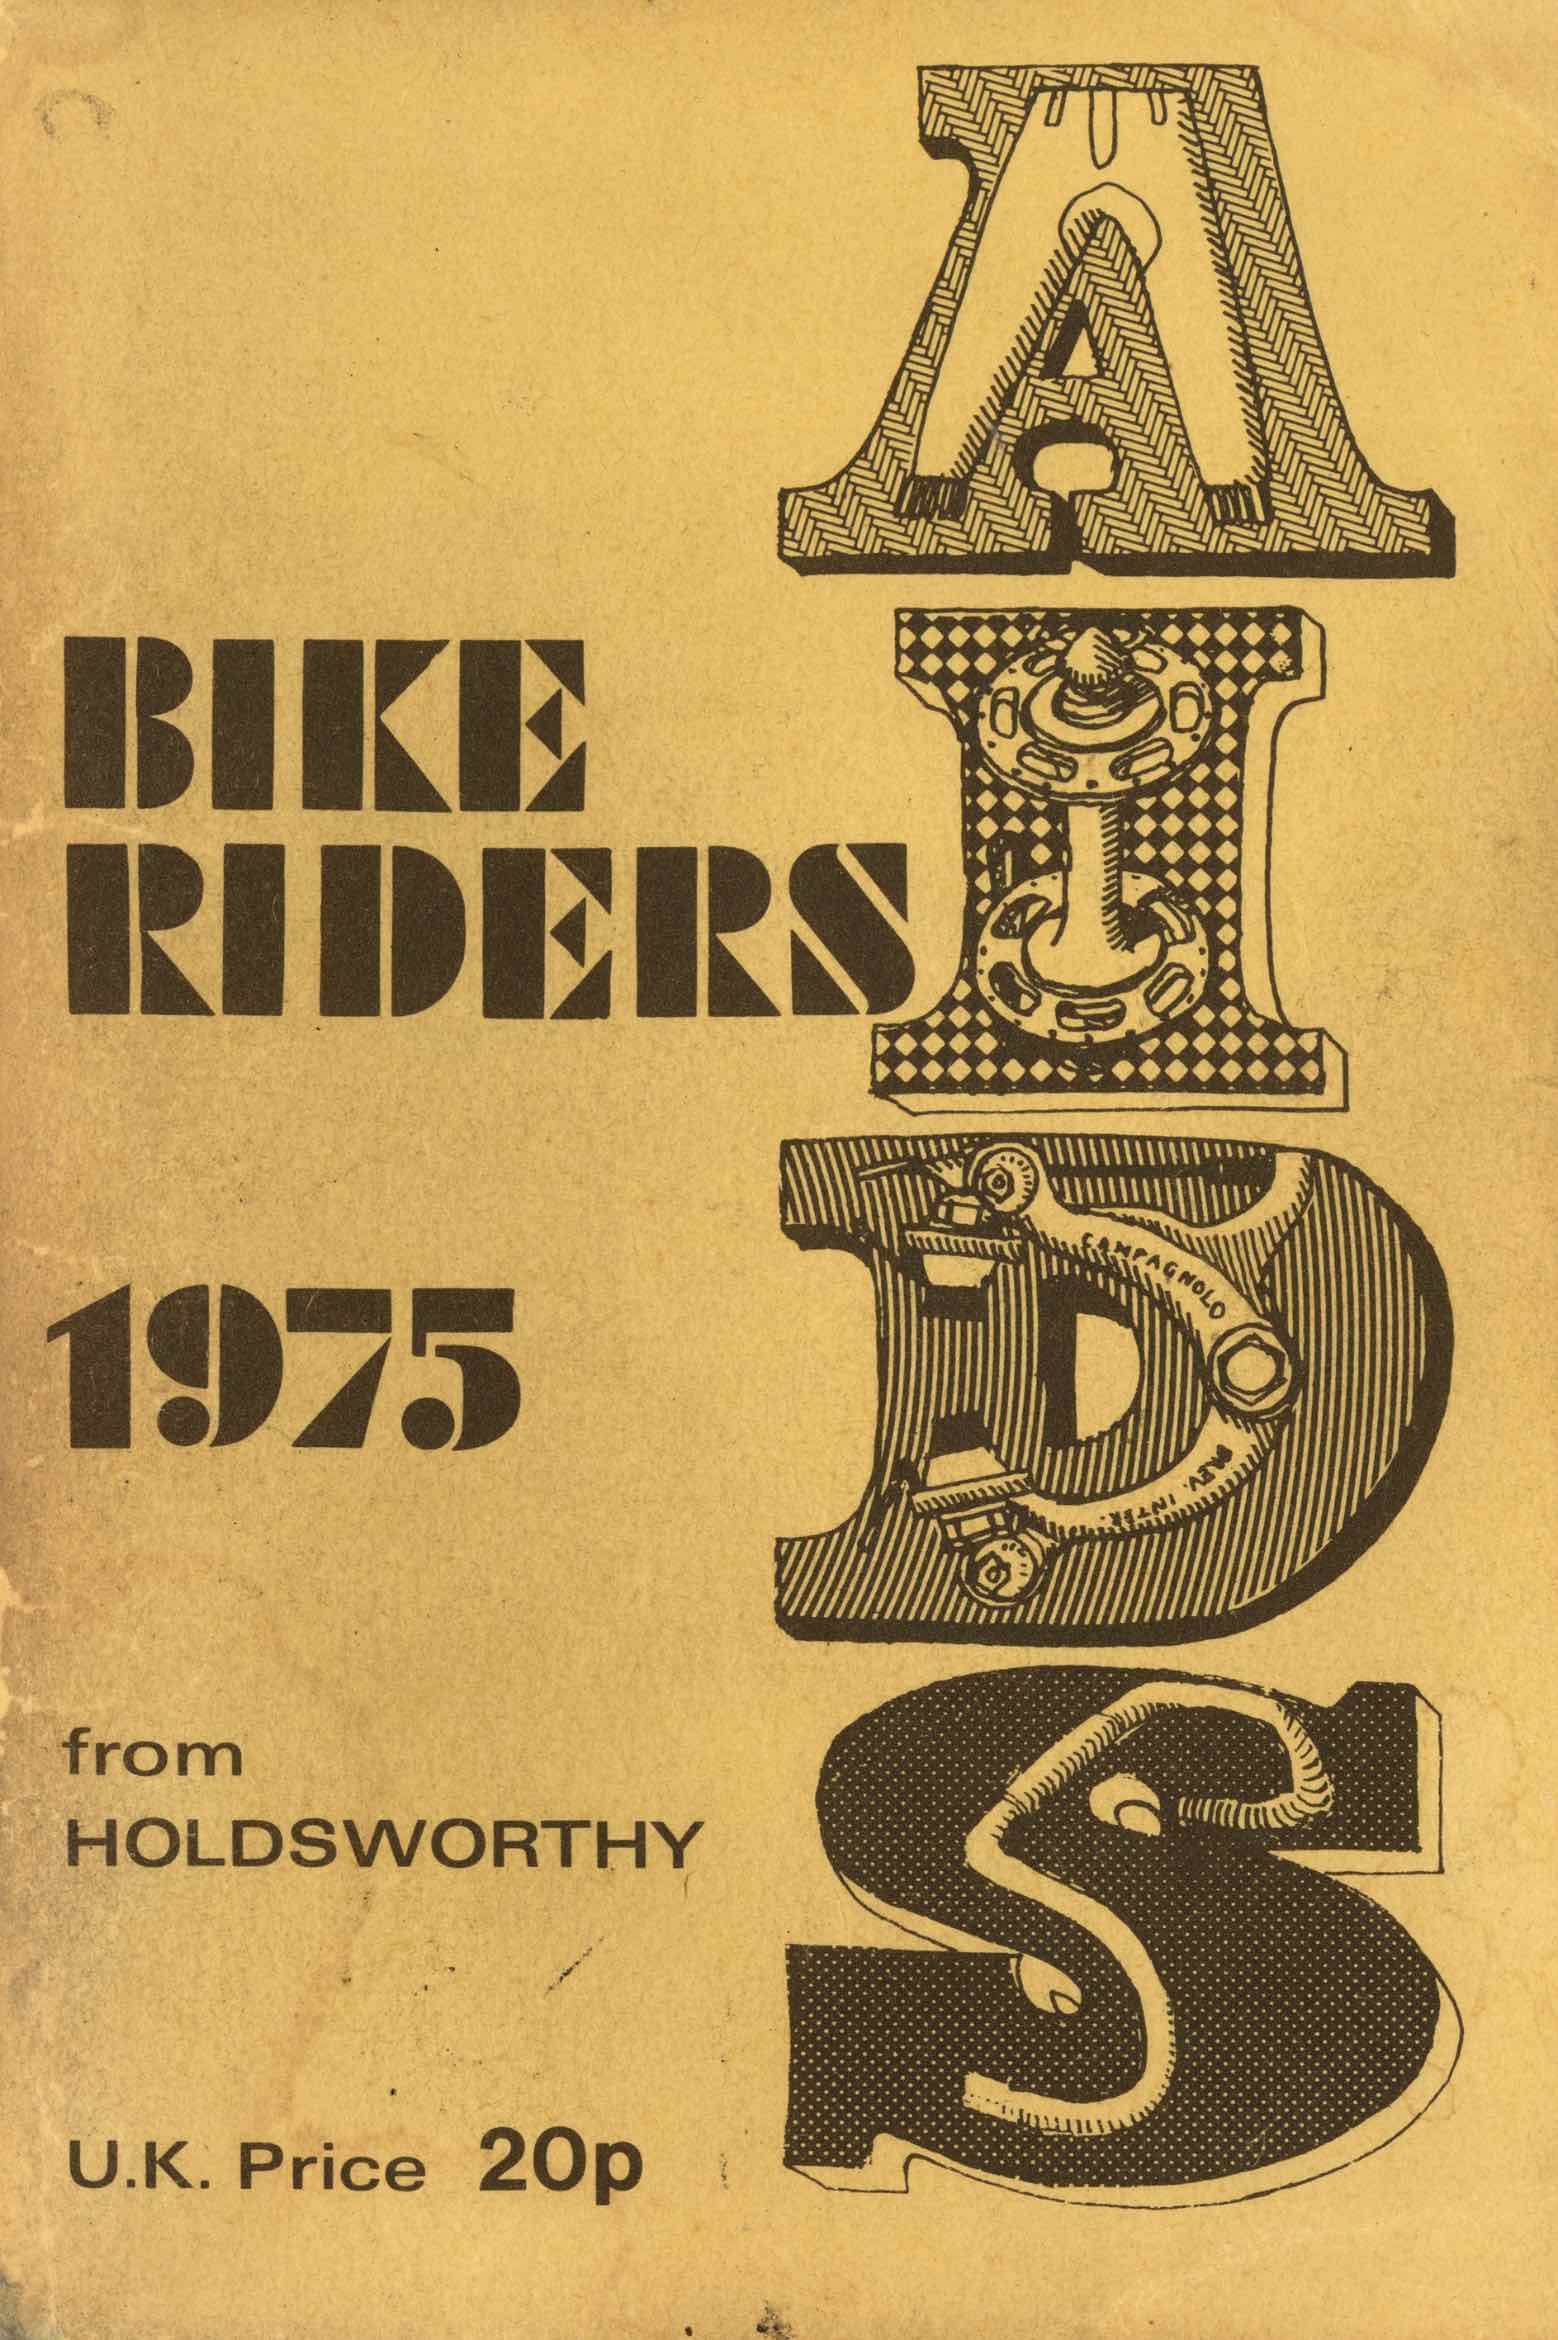 Holdsworth - Bike Riders Aids 1975 front cover main image